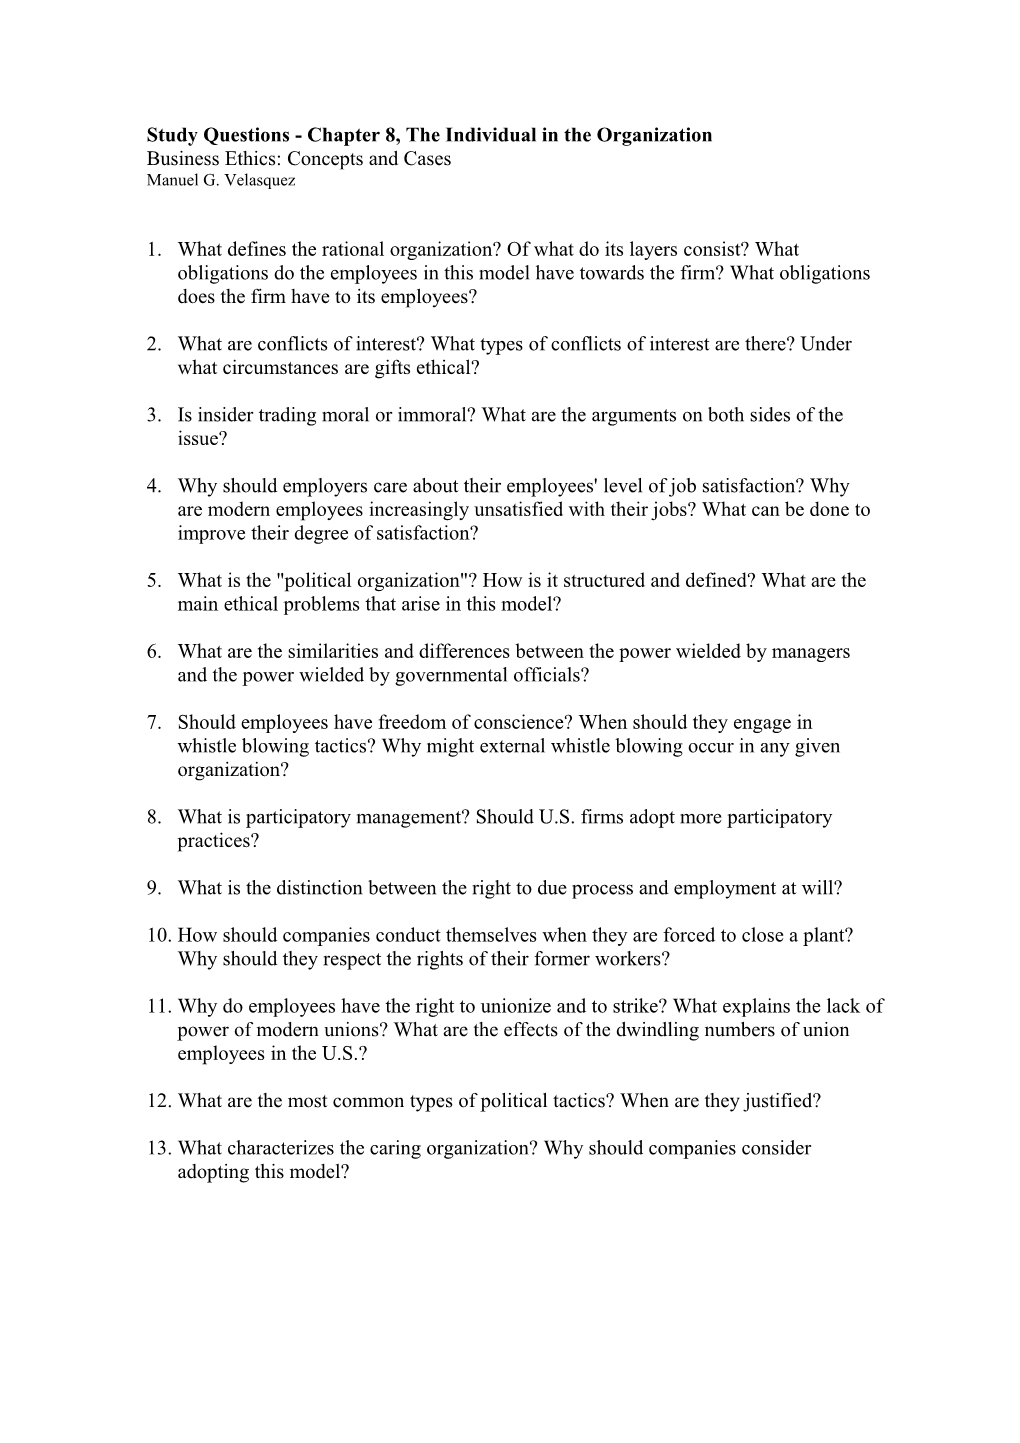 Study Questions - Chapter 8, the Individual in the Organization